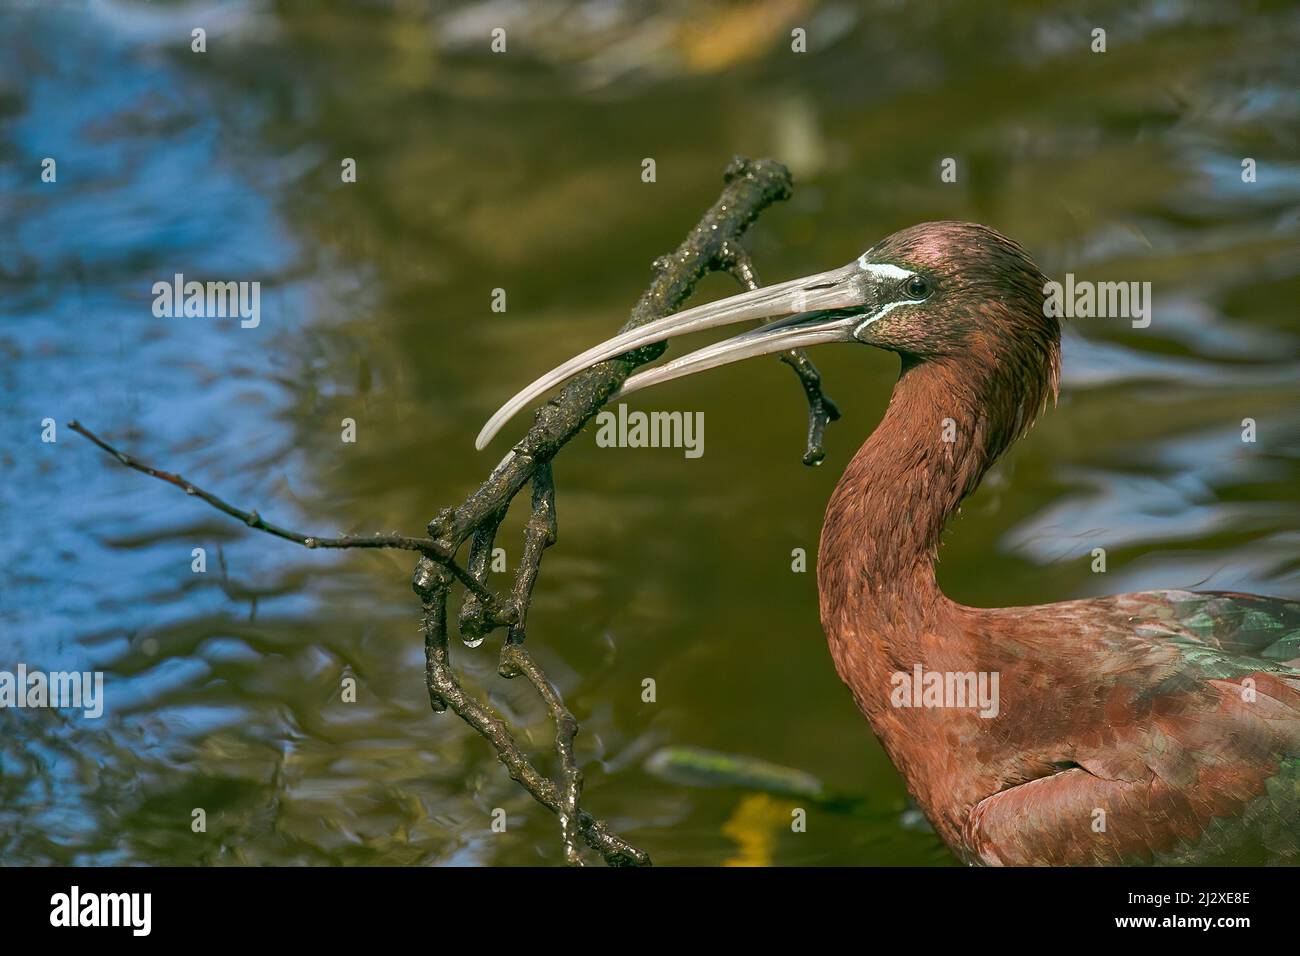 A glossy ibis finds a twig to bring back to its nest in the Florida Everglades. Stock Photo